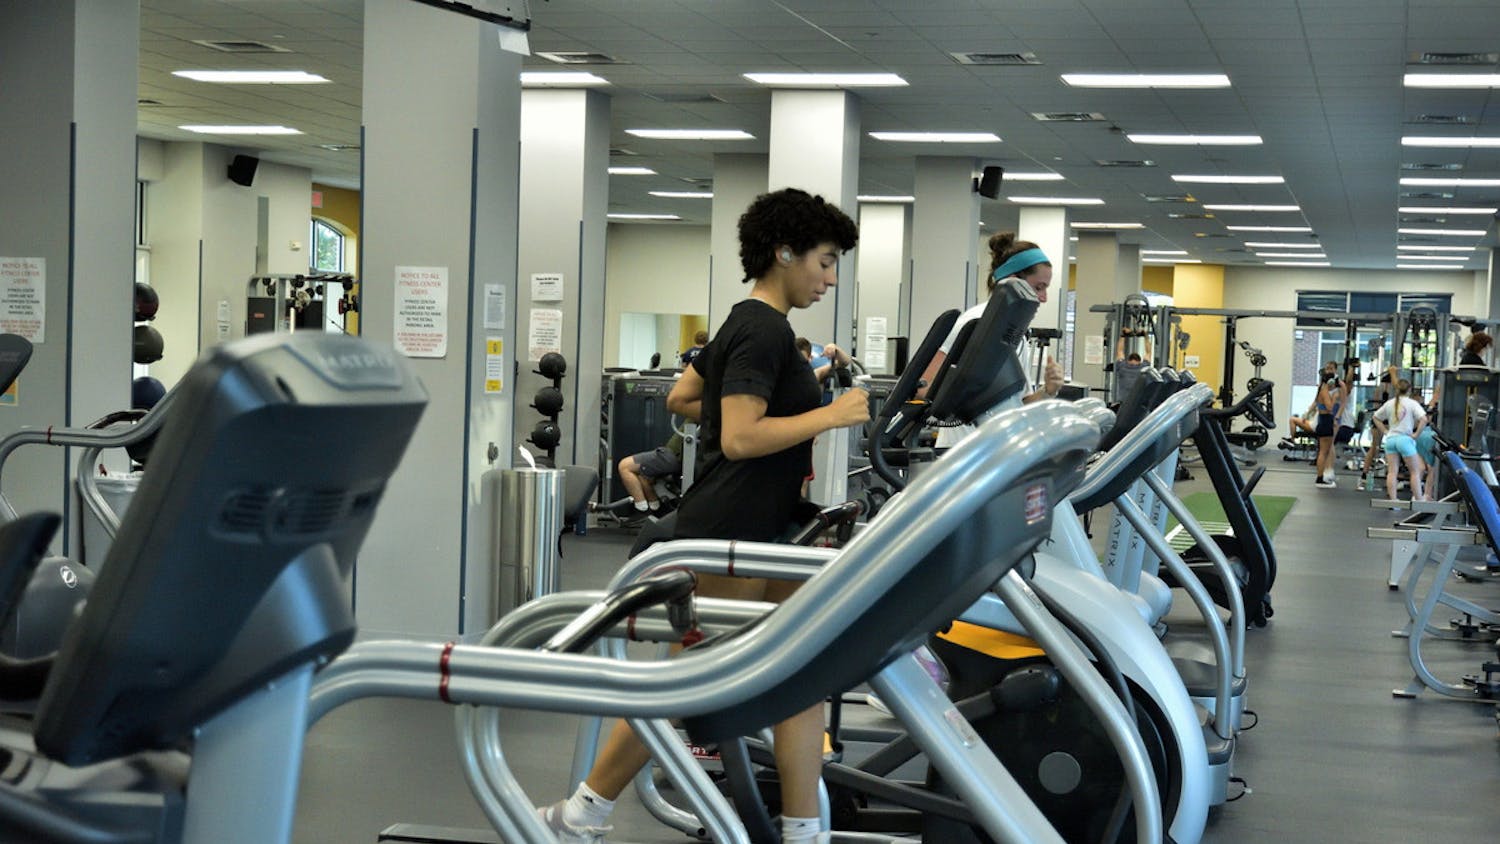 The atmosphere of the Fitness Center at Campus Town is very representative of gyms outside of the campus, as there are athletes, bodybuilders and people who want to lose weight (Photo by Shane Gillespie / Photo Editor).